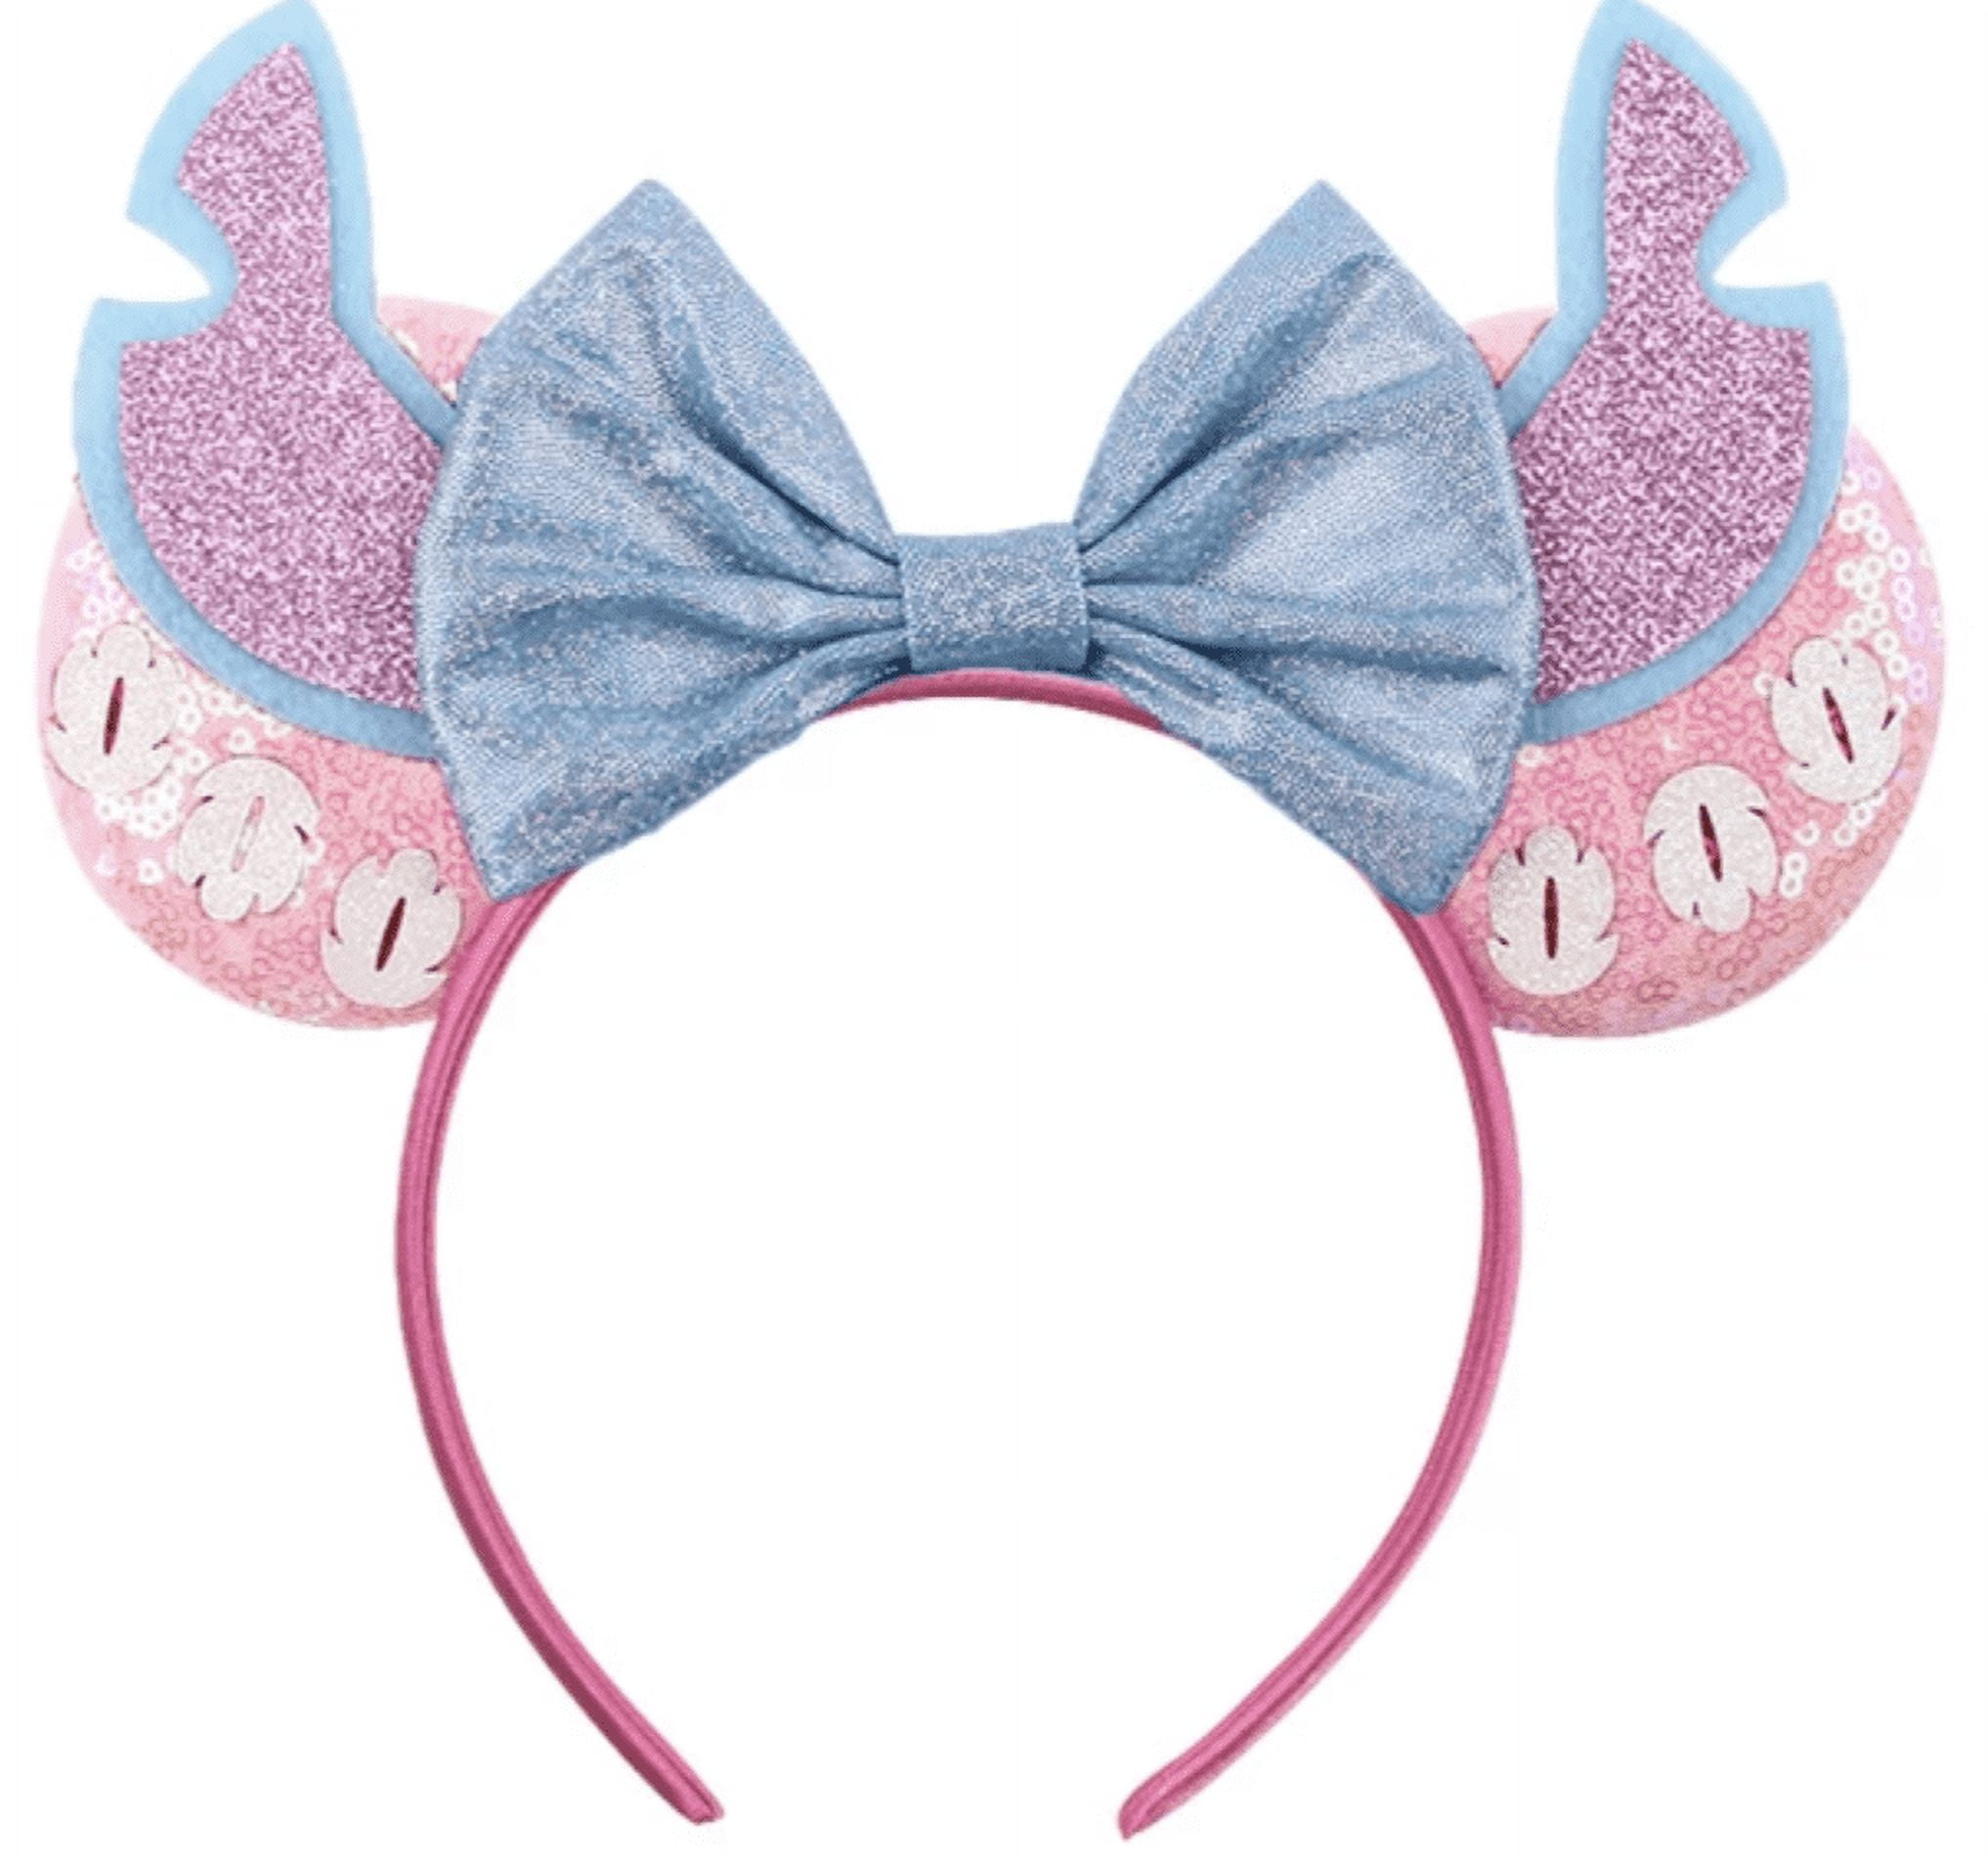 New Disney Stitch Ears Headband Party Cosplay Gift Kids / Adult